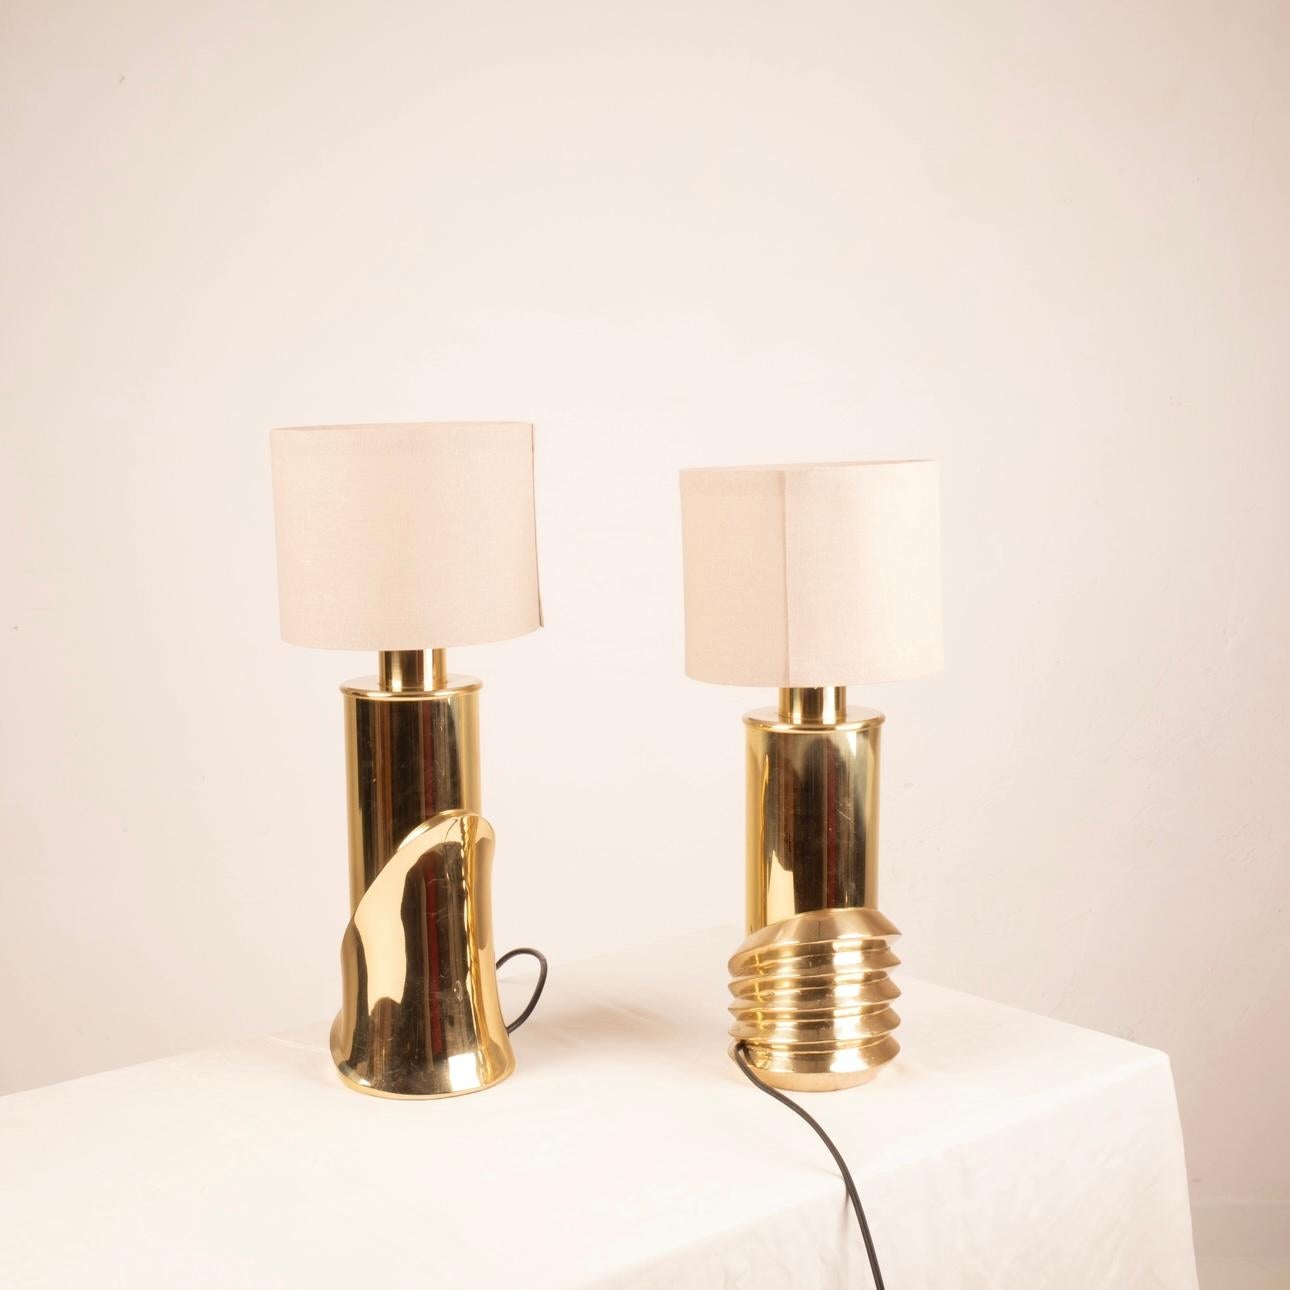 Pair of Brass Lamps by Luciano Frigerio for Frigerio of Desio For Sale 3